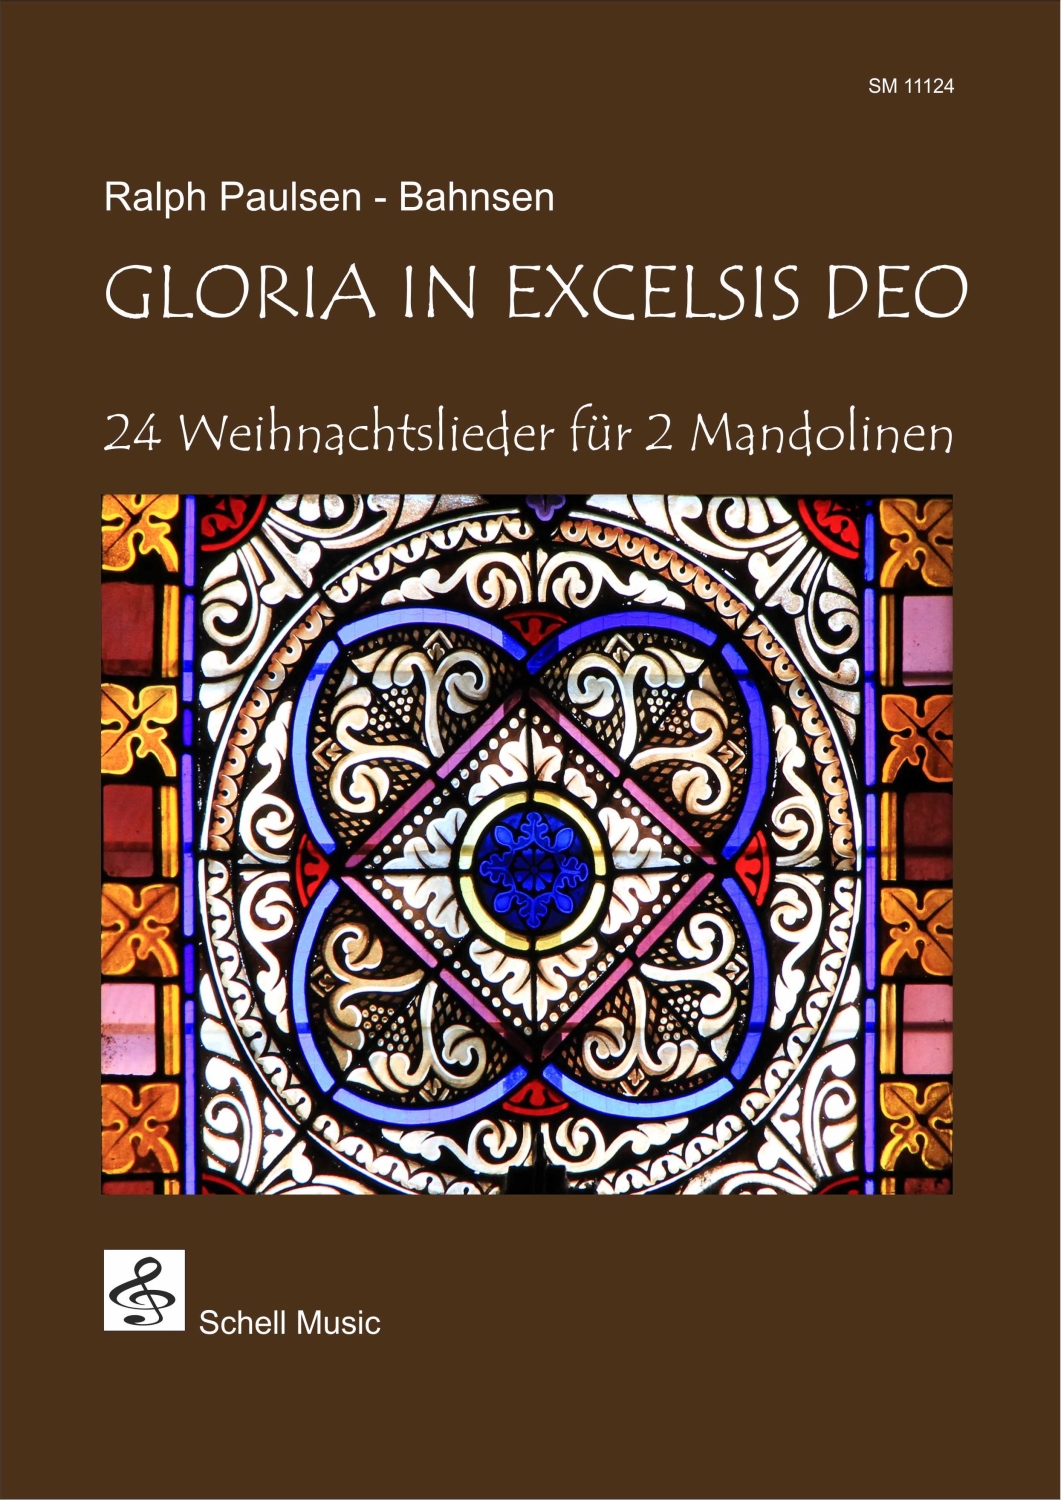 Gloria-in-excelsis-deo-2Mand-_0001.JPG